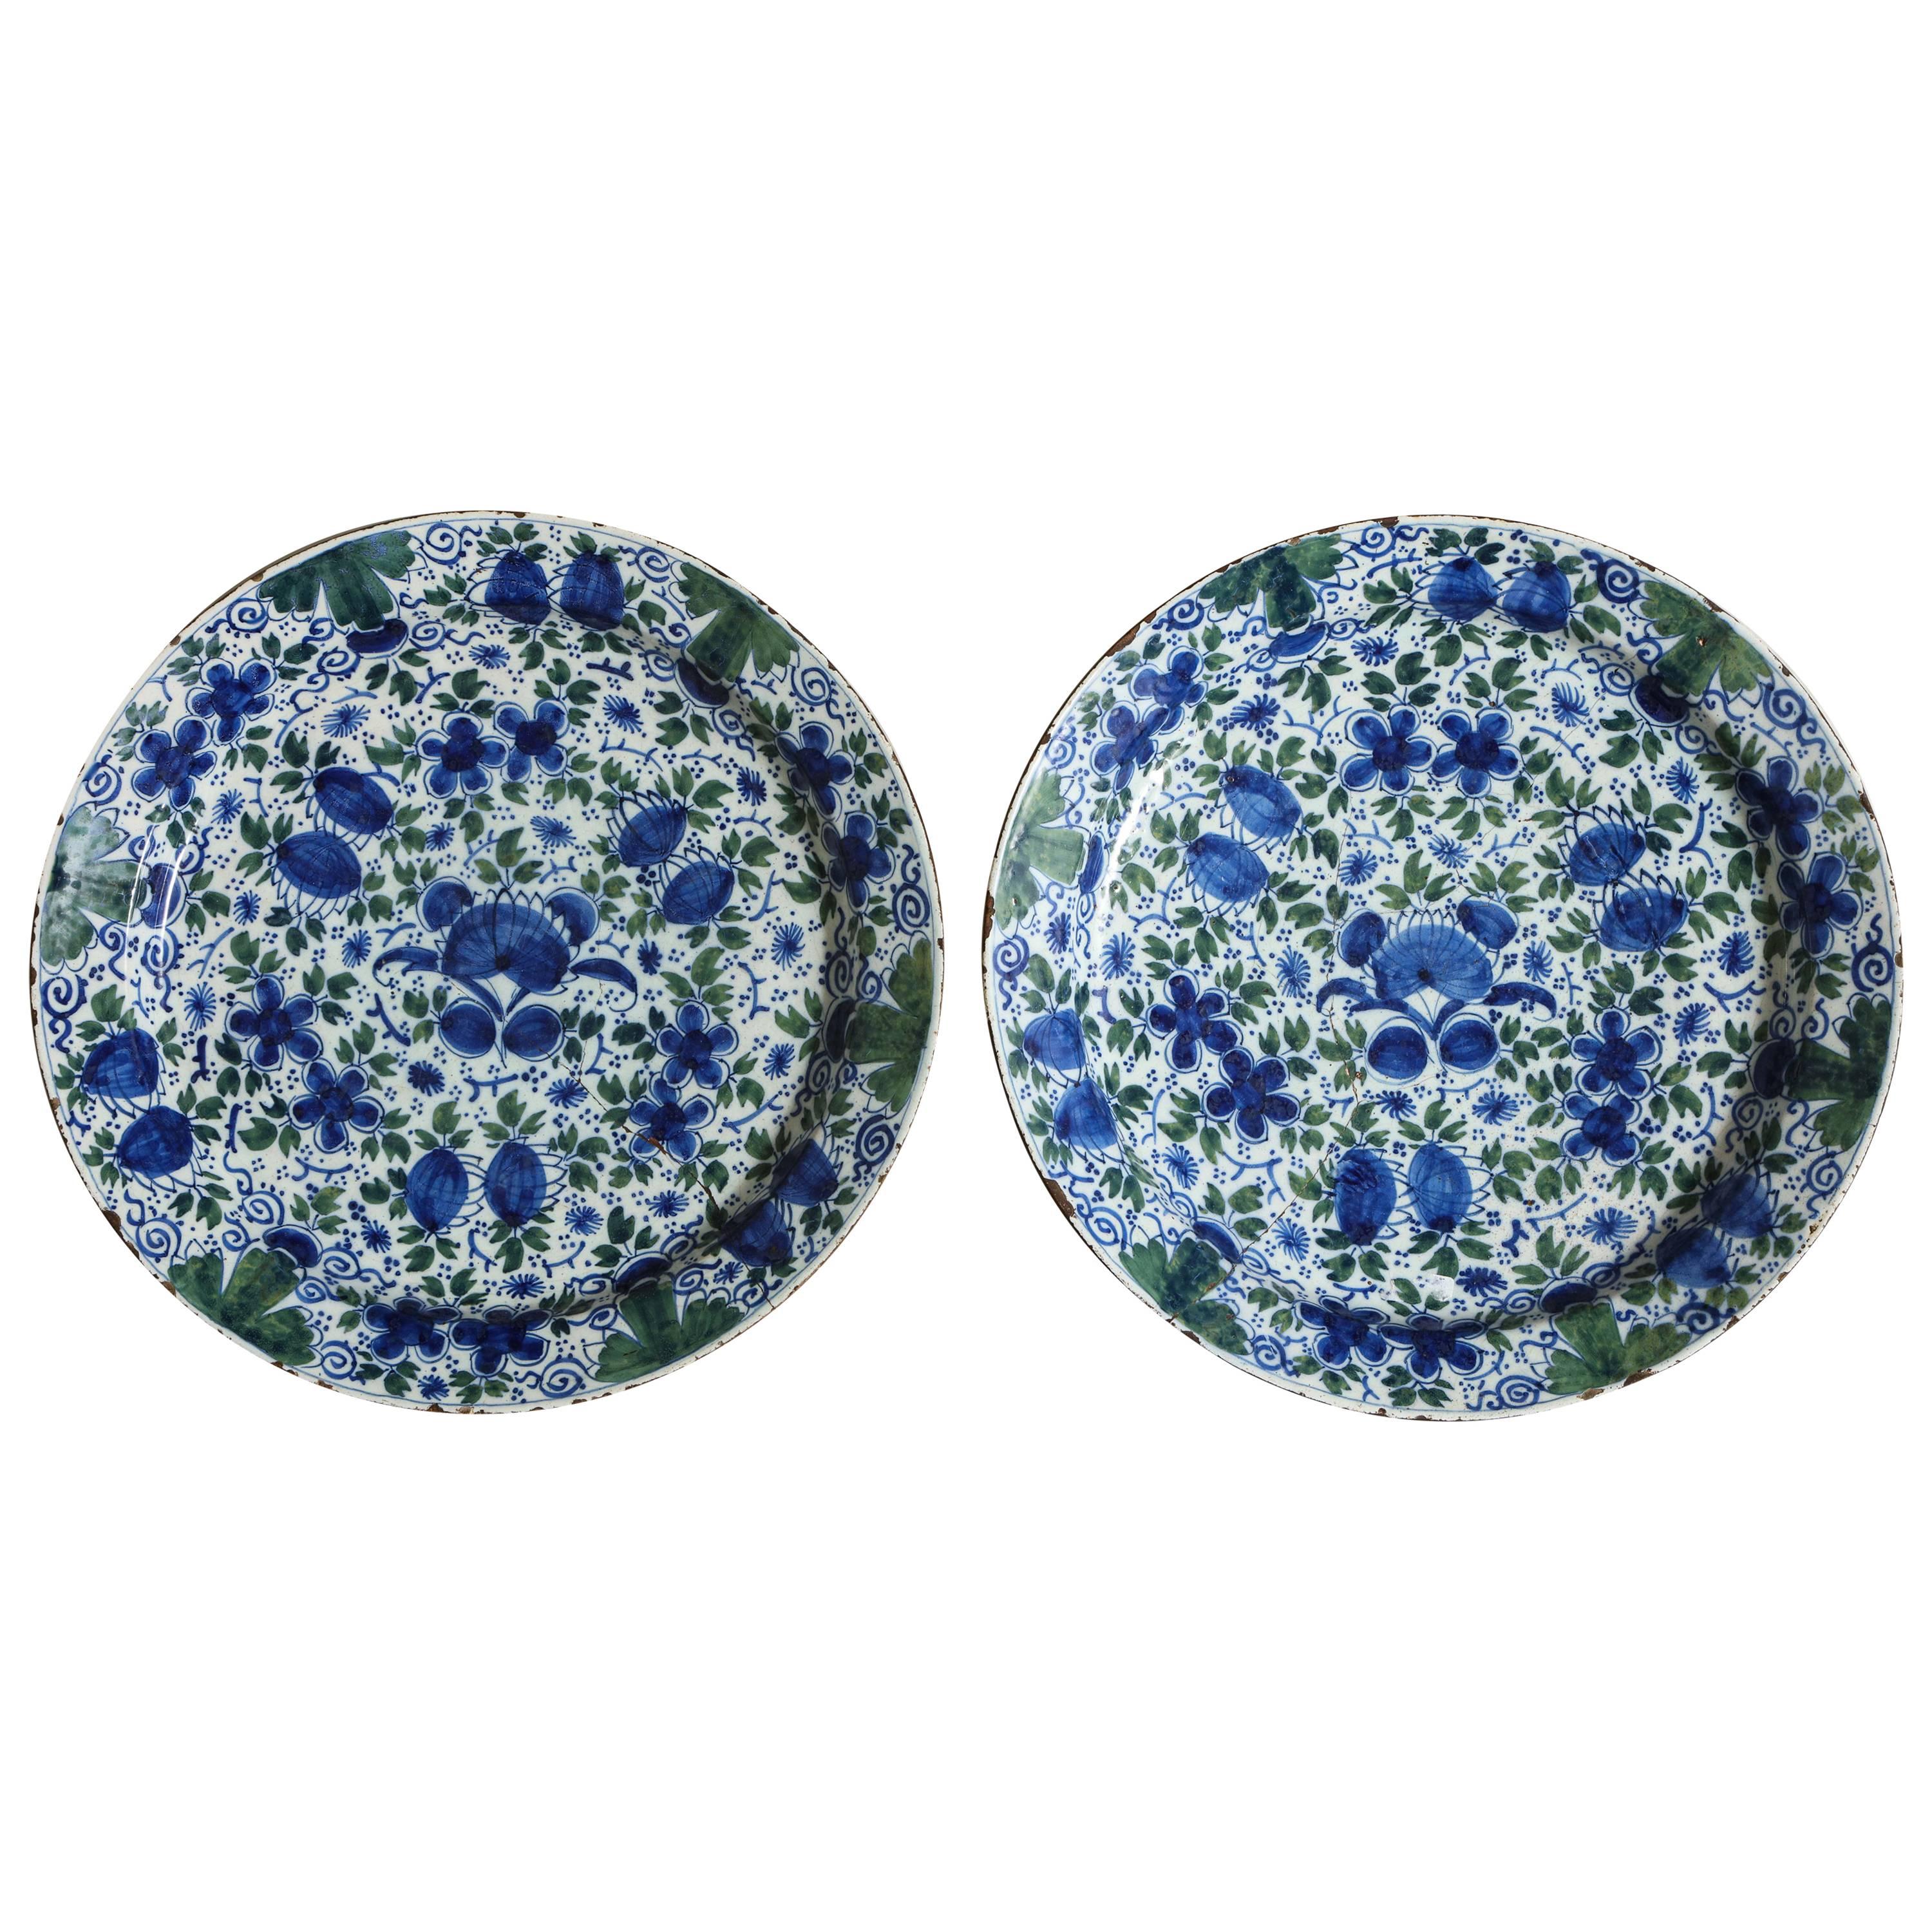 Pair of Profusely Decorated Delft Chargers